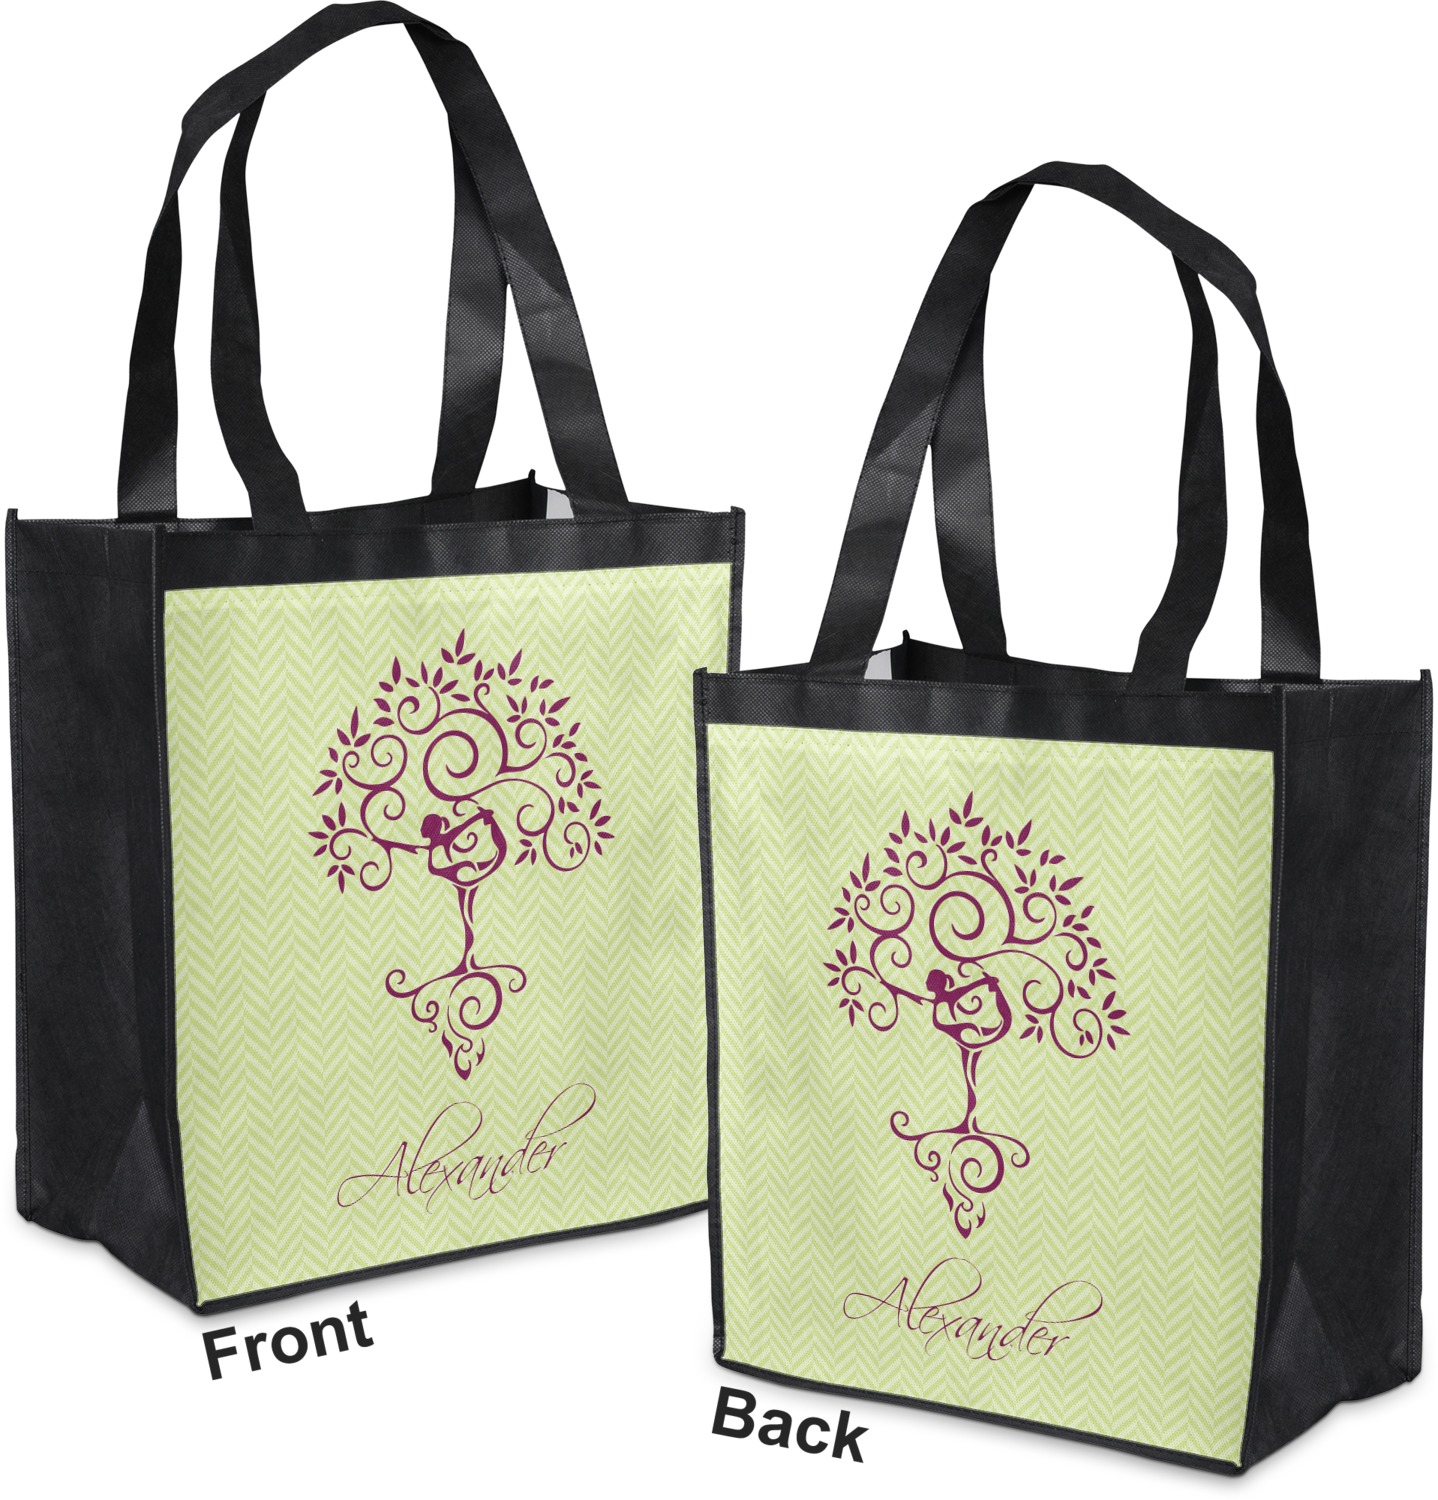 Personalized Yoga Tree Zippered Everyday Tote Front & Back 